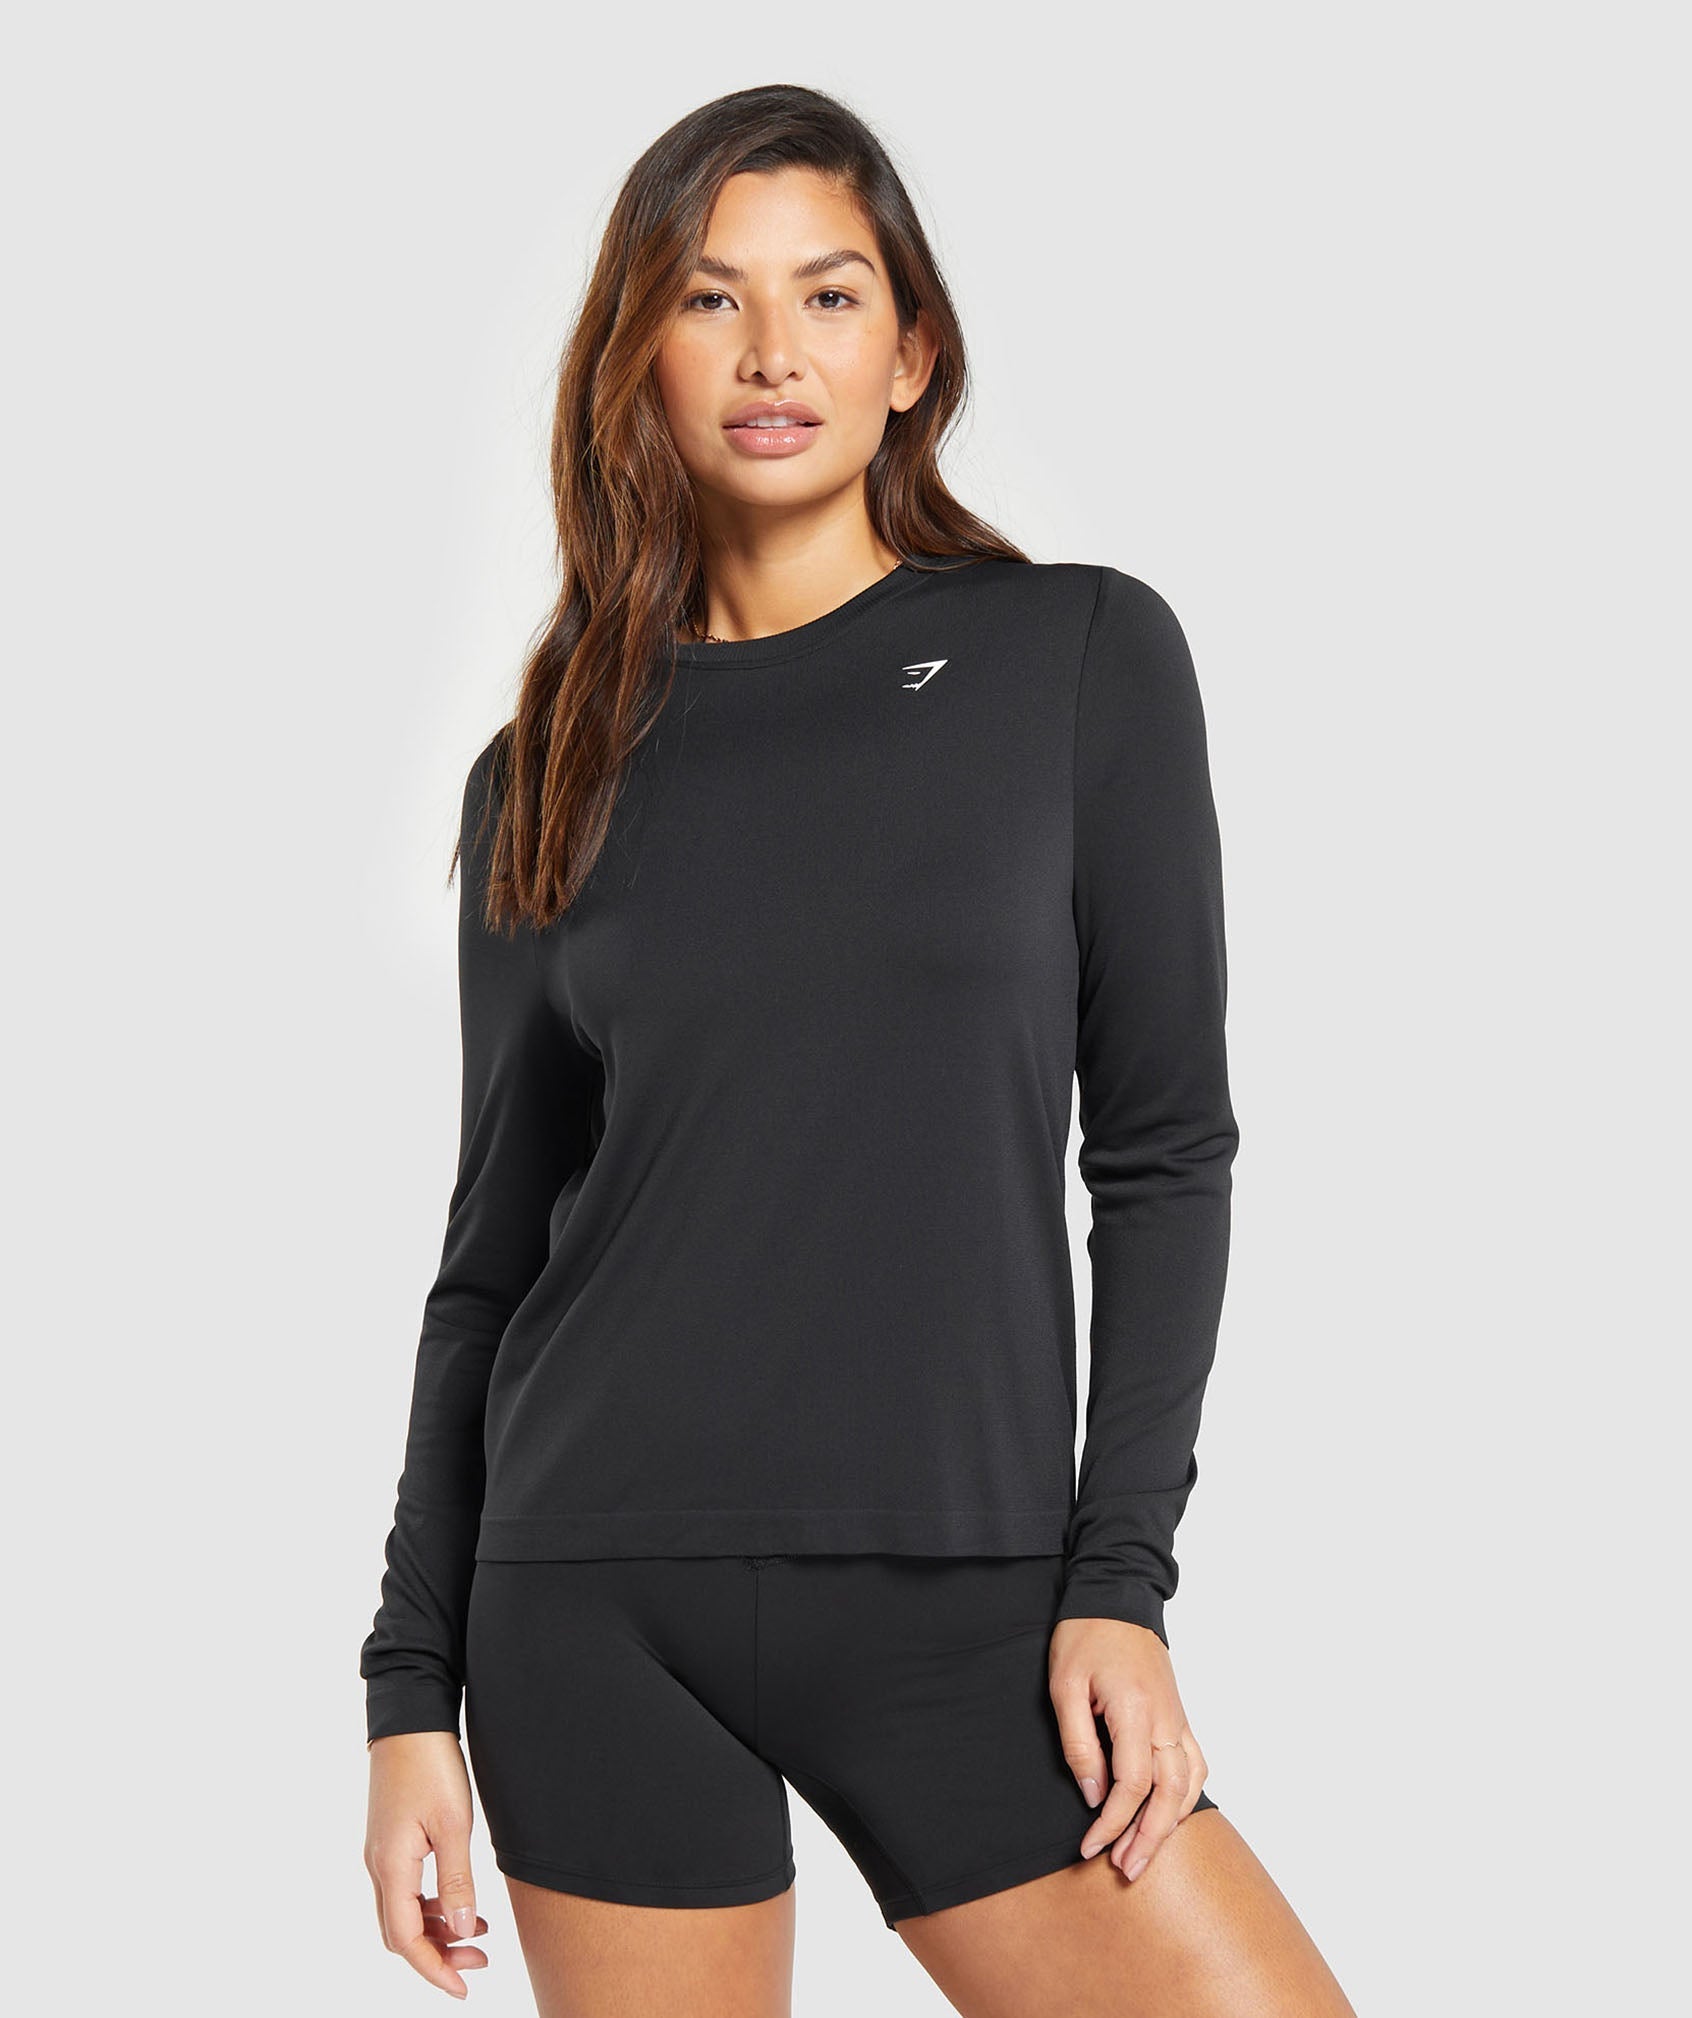 Everyday Seamless Long Sleeve Top in Black - view 1